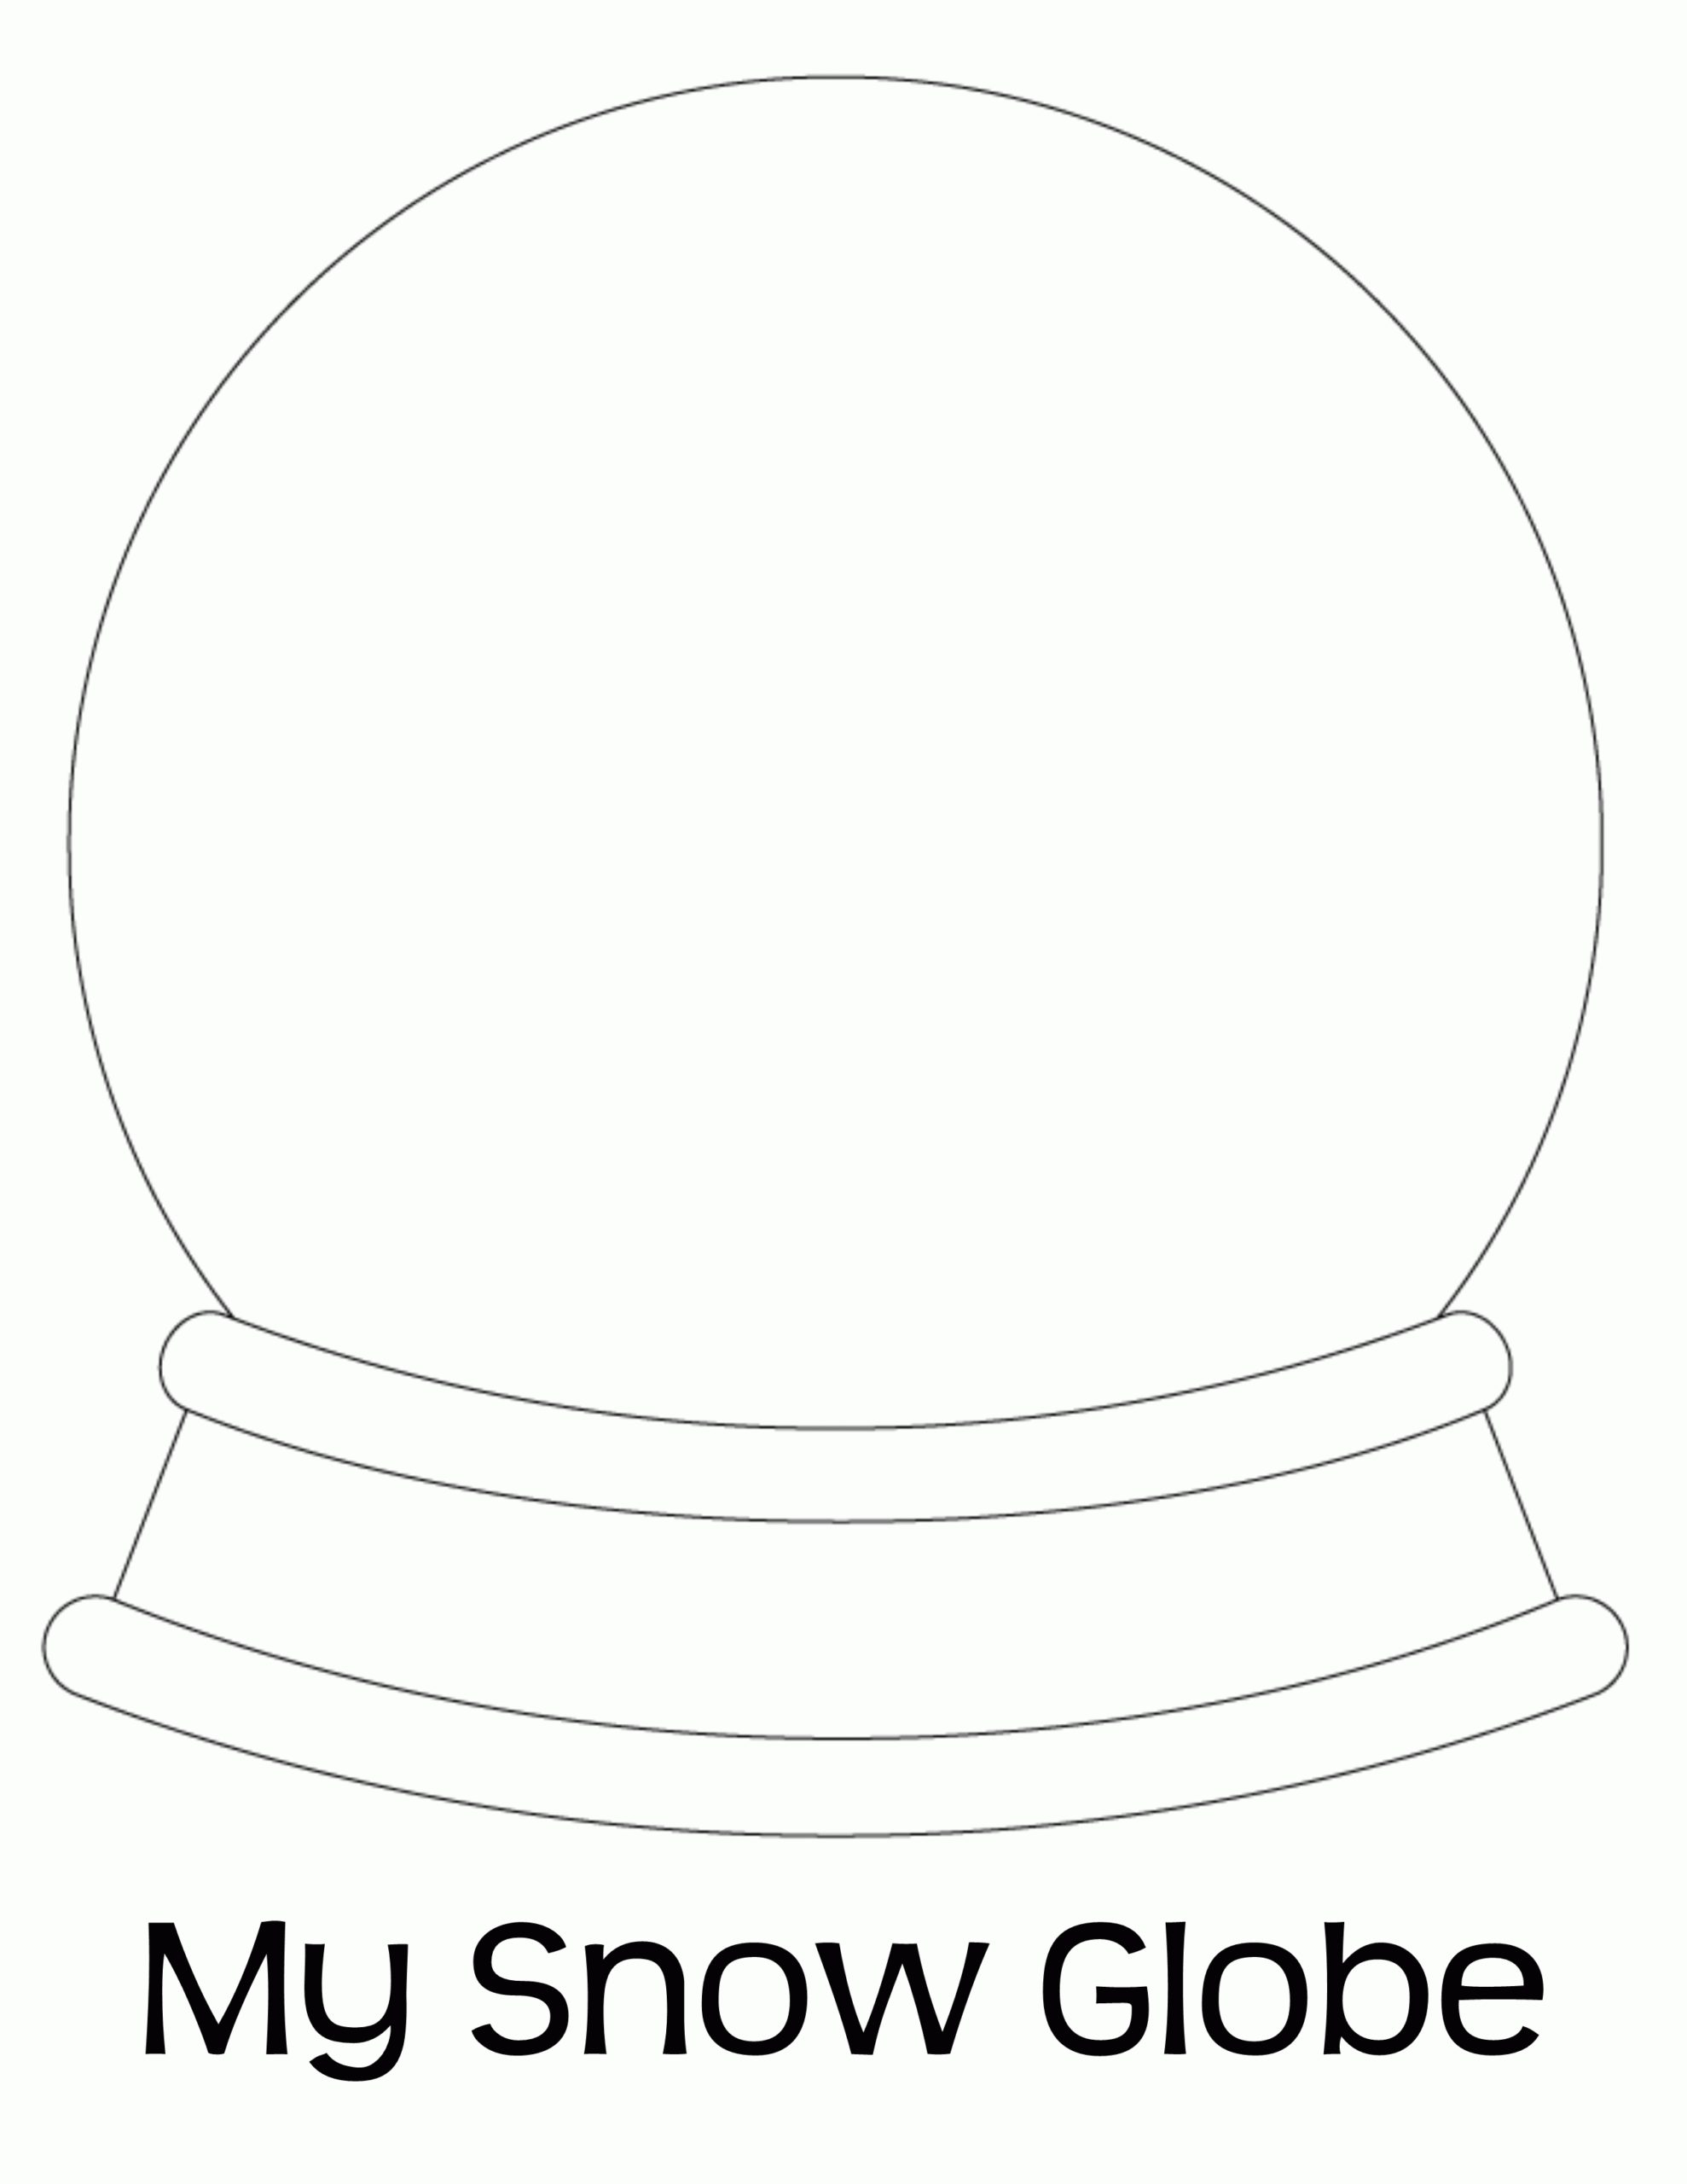 Coloring Pages : Most Brilliant Blank Snow Globe Coloring Page Print Color  Fun Pages Free Clip Art Globes Glitter Diy Christmas Plastic Unique  Cardinal Scaled Staggering Christmas Snow Globe Coloring Pages ~